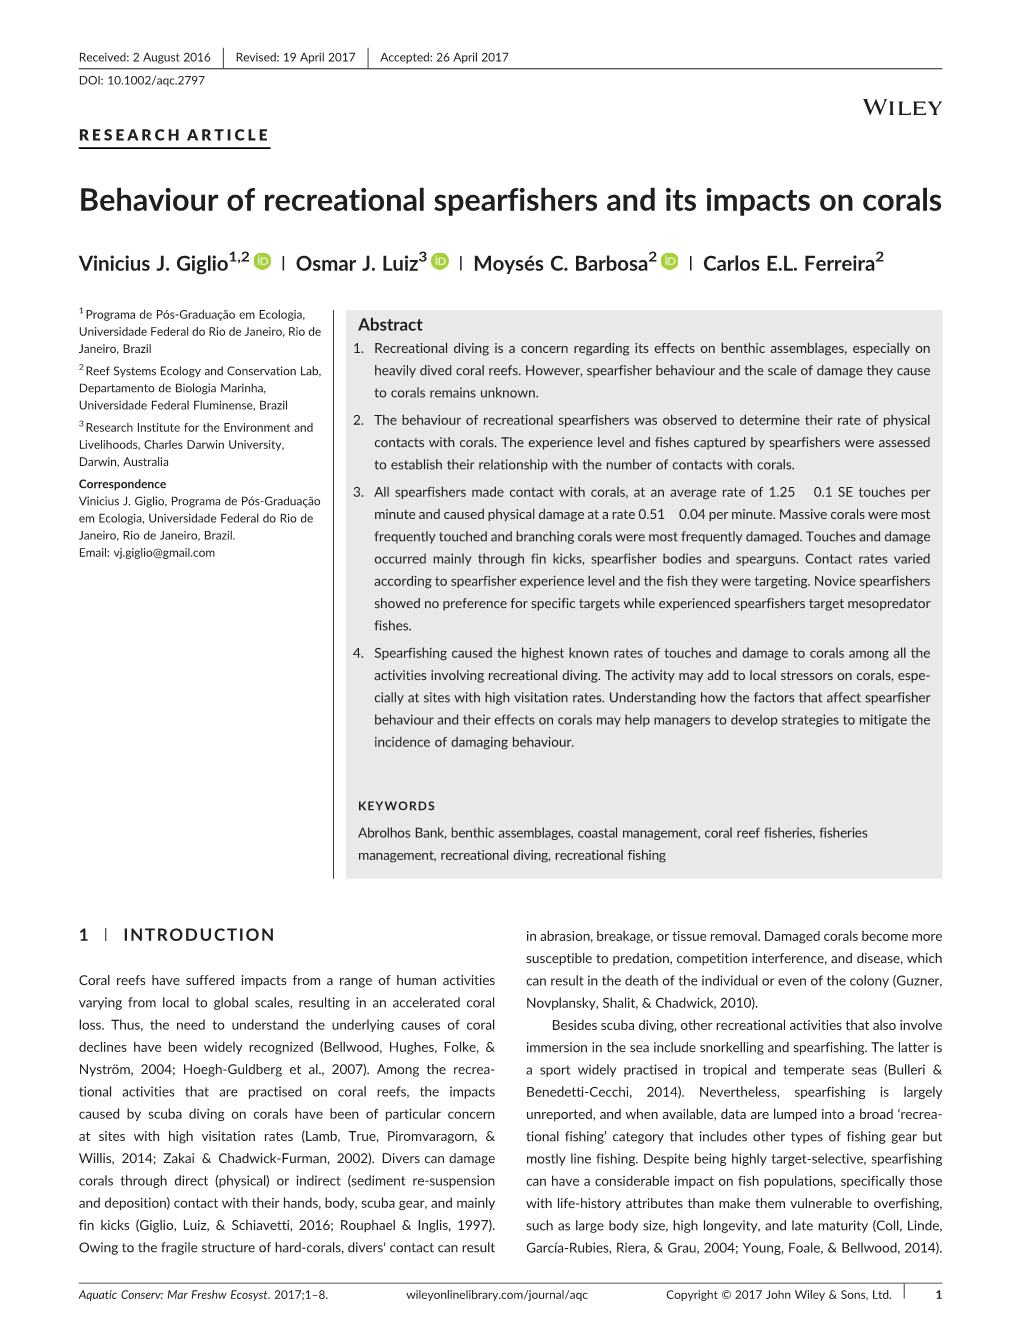 Behaviour of Recreational Spearfishers and Its Impacts on Corals